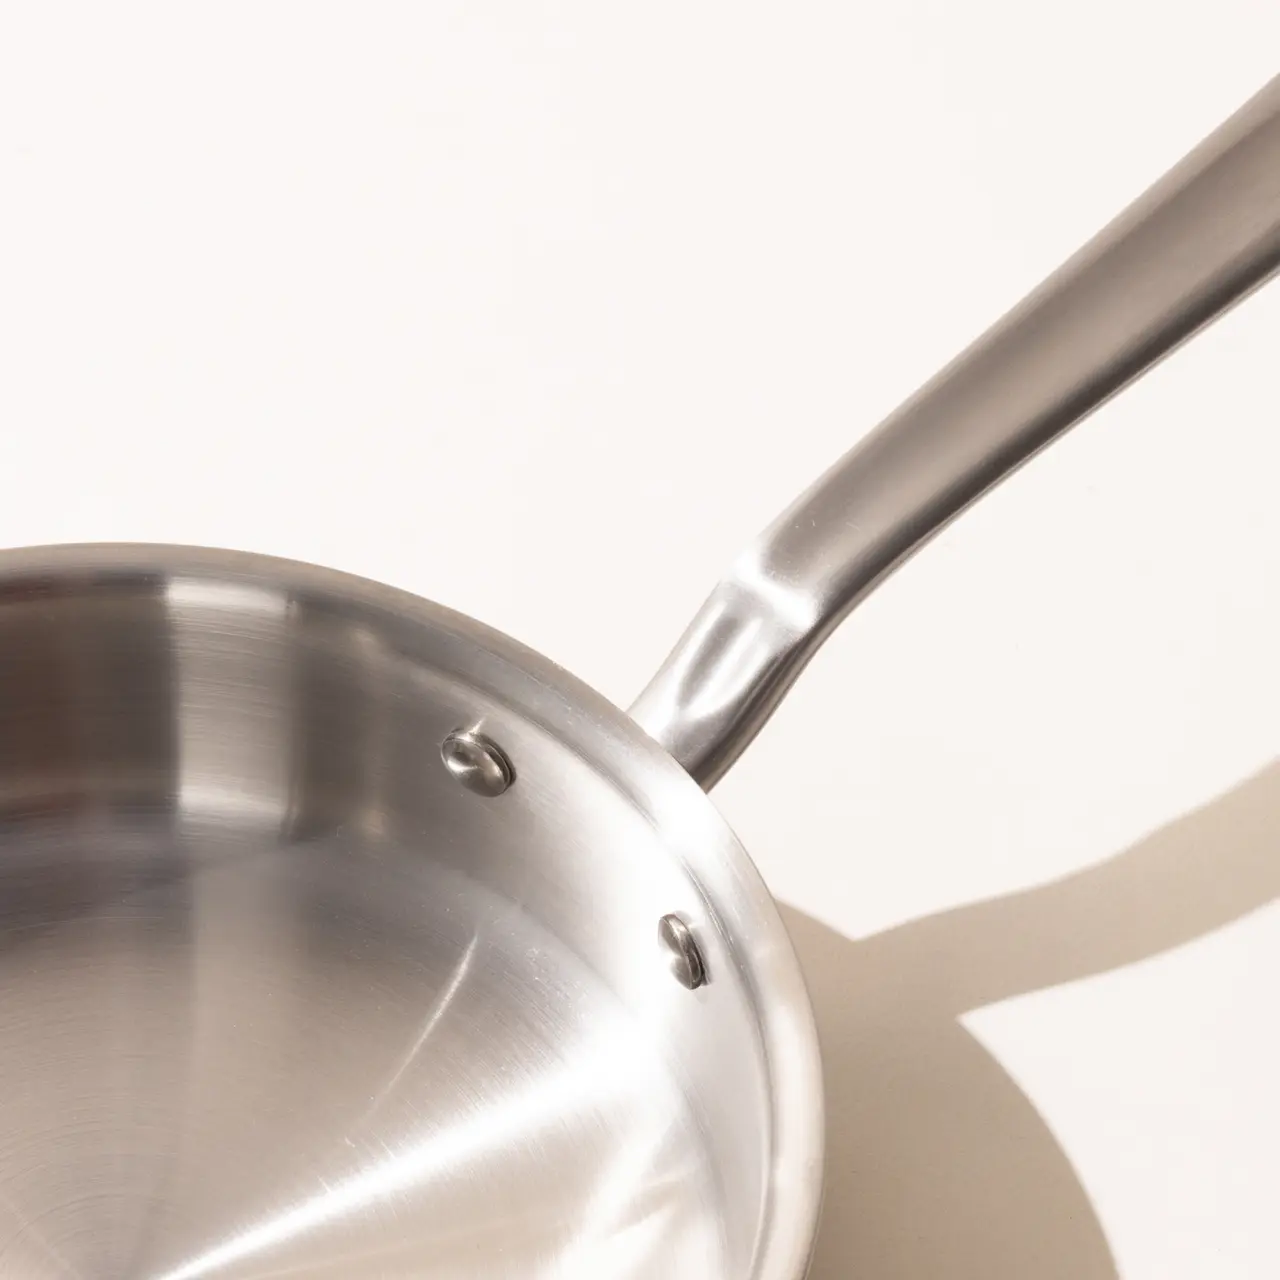 A stainless steel frying pan with a long handle on a light background, casting a soft shadow.